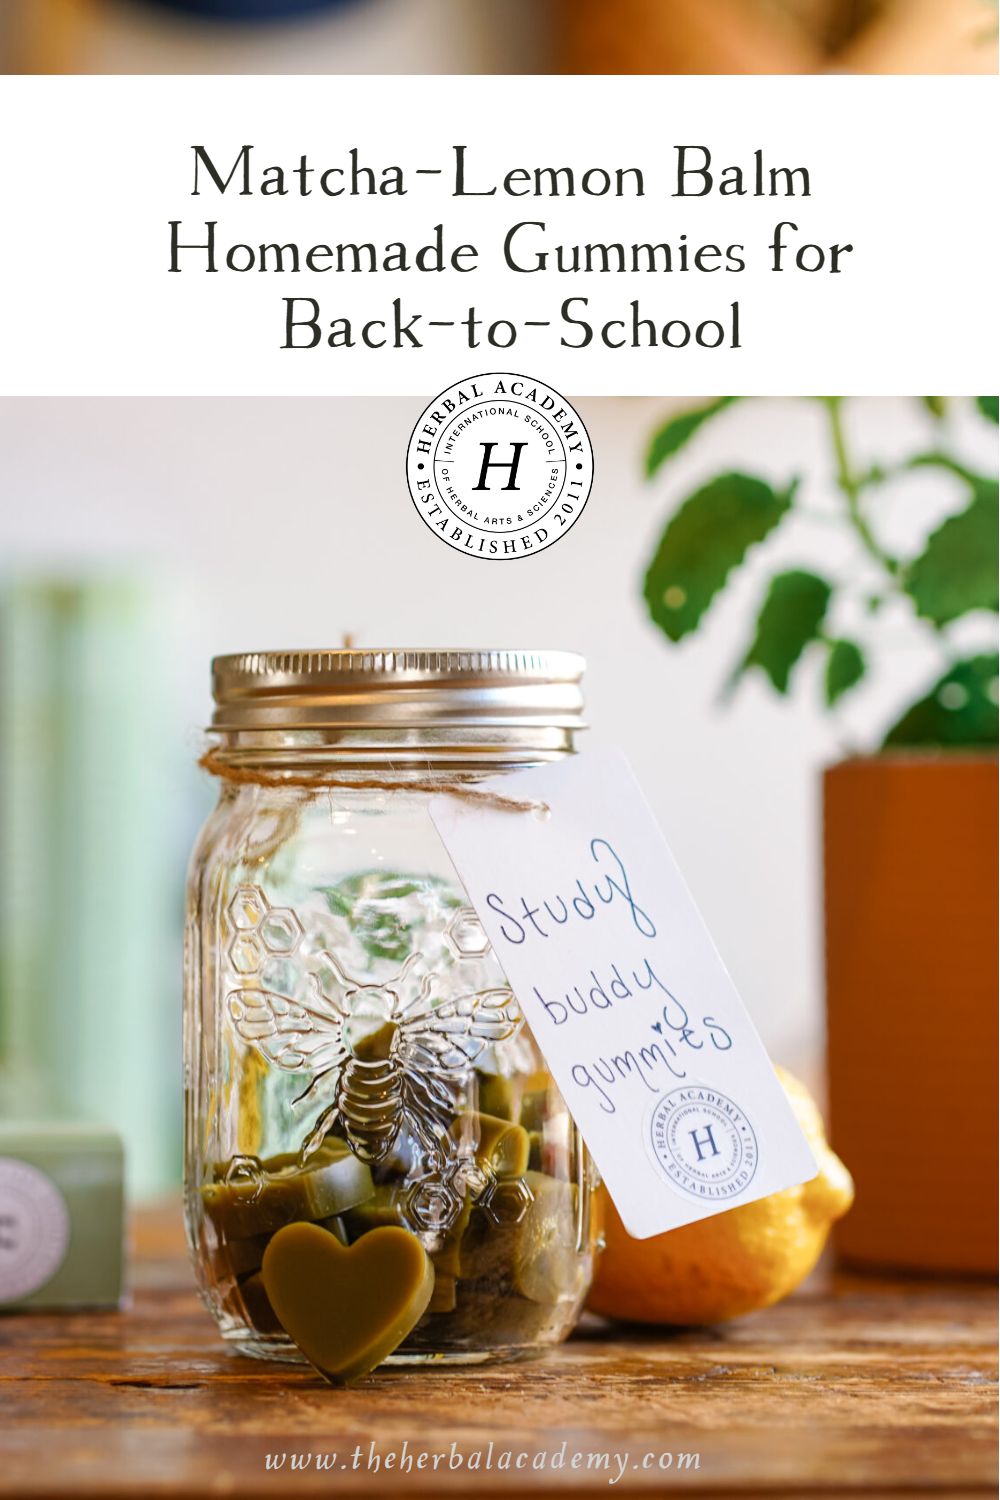 Matcha-Lemon Balm Homemade Gummies for Back-to-School | Herbal Academy | As you ready yourself for back-to-school season, whip up a batch of these easy homemade gummies to give your brain some herbal love!